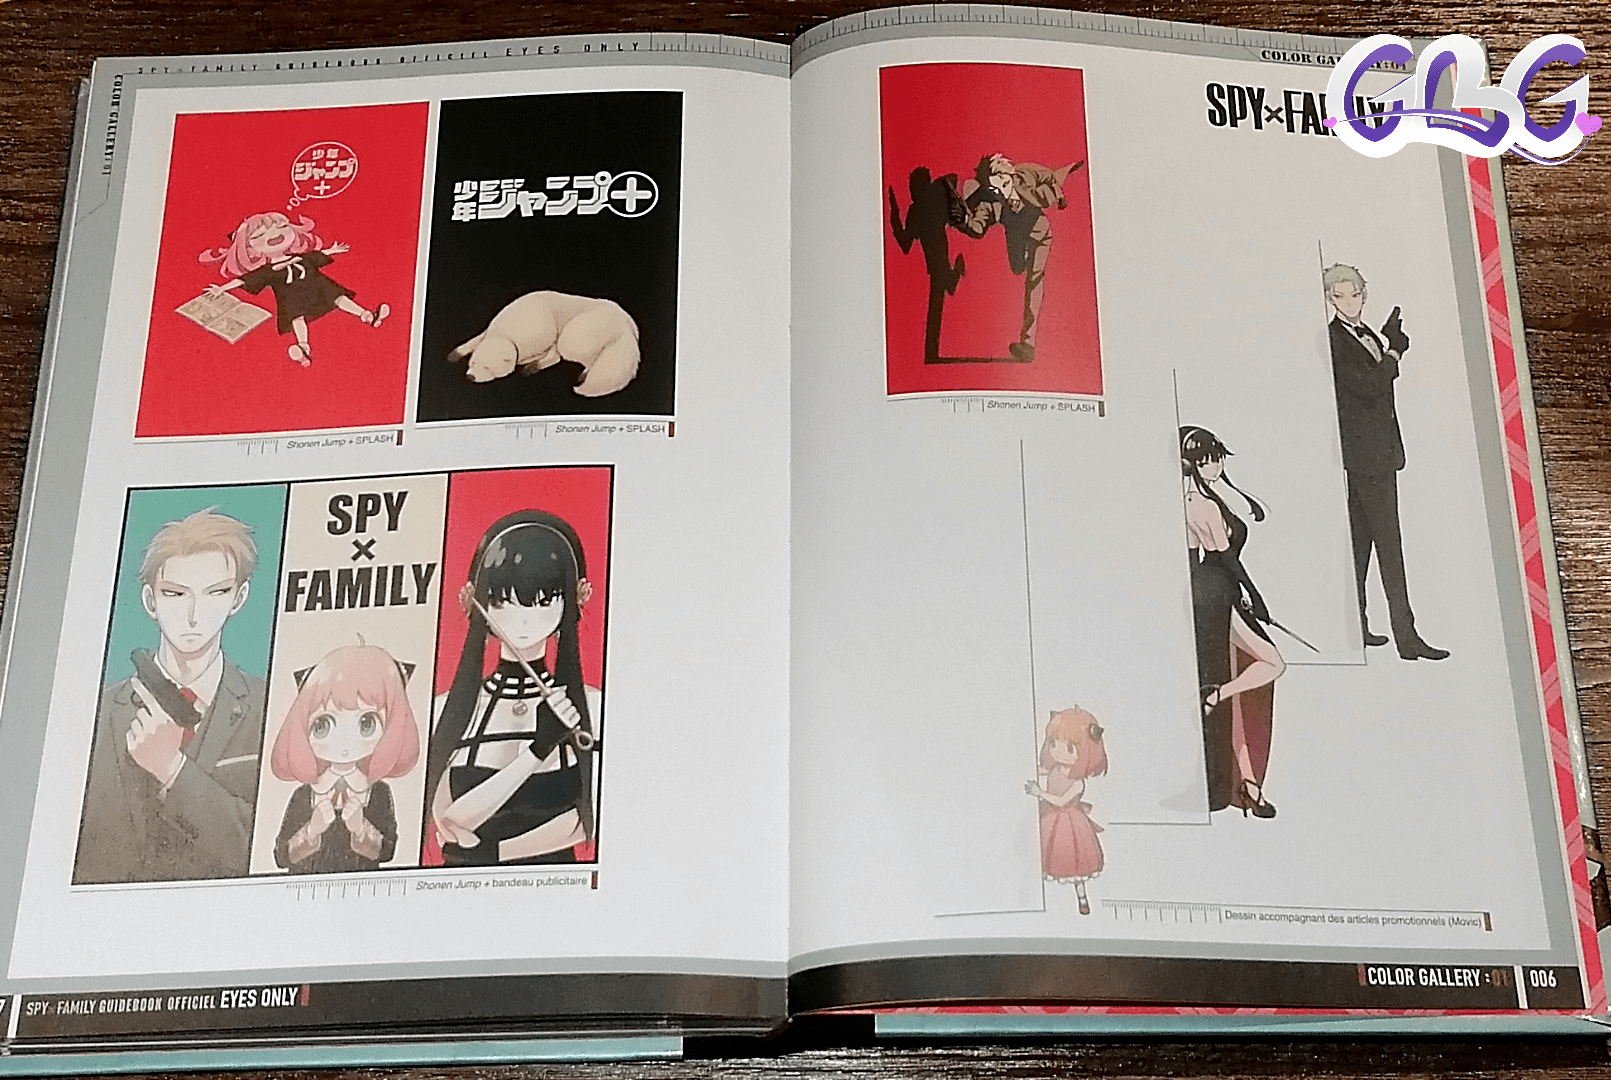 Exemple d'illustrations dans "Spy x Family Guidebook - Edition Luxe"